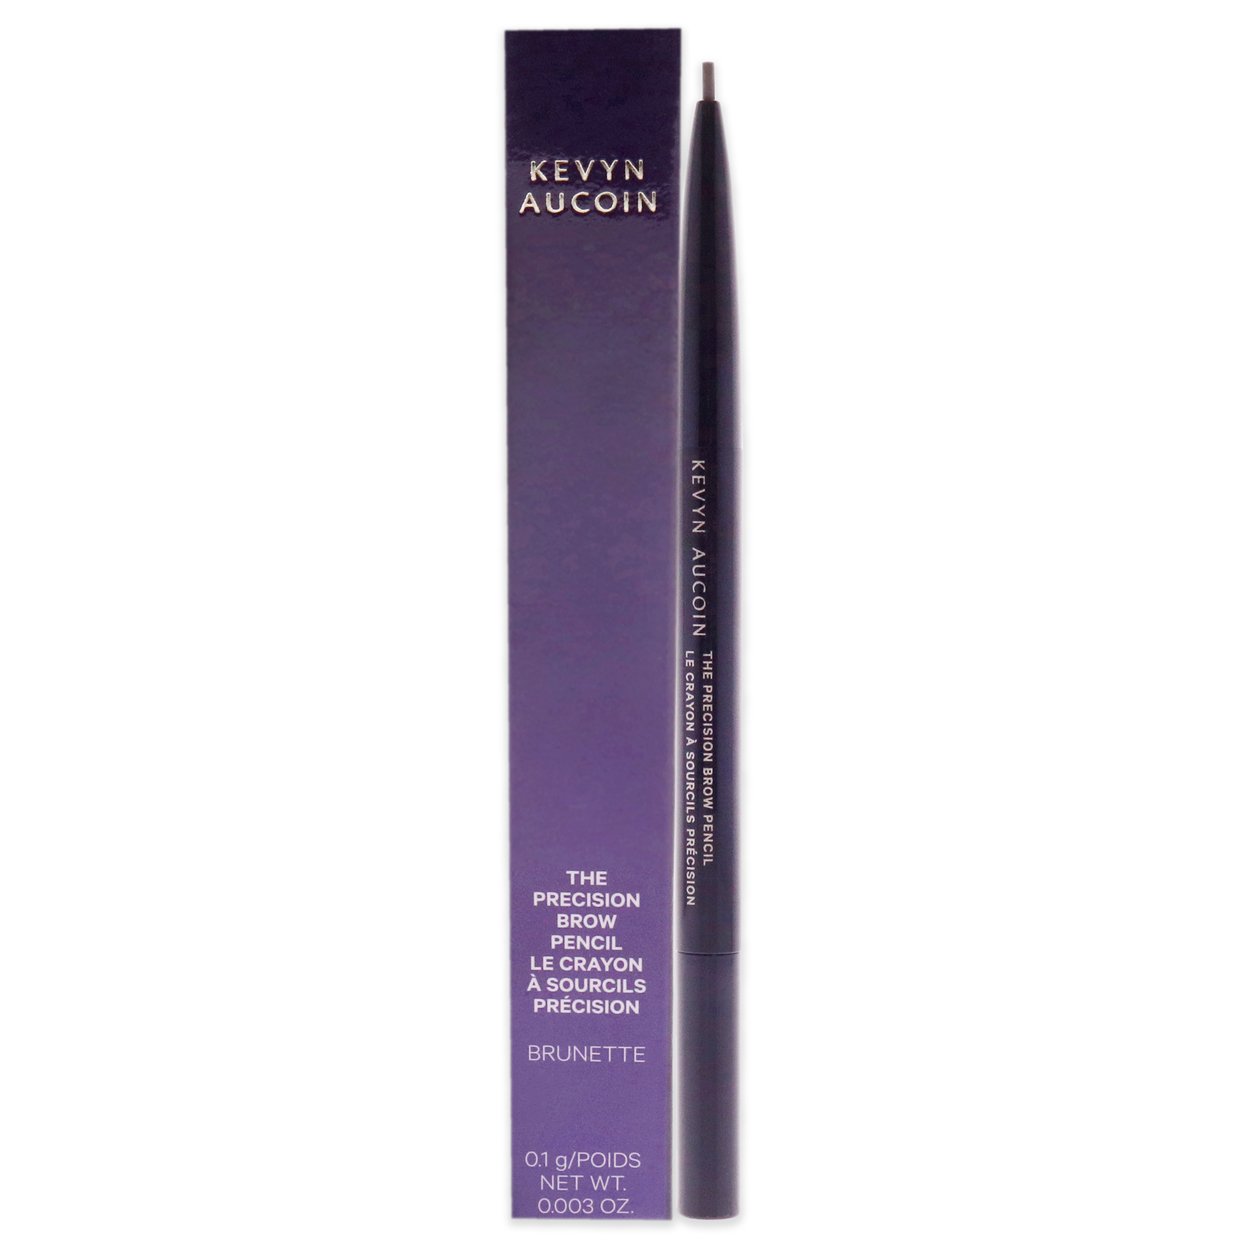 Kevyn Aucoin Women COSMETIC The Precision Brow Pencil - Brunette 0.003 Oz